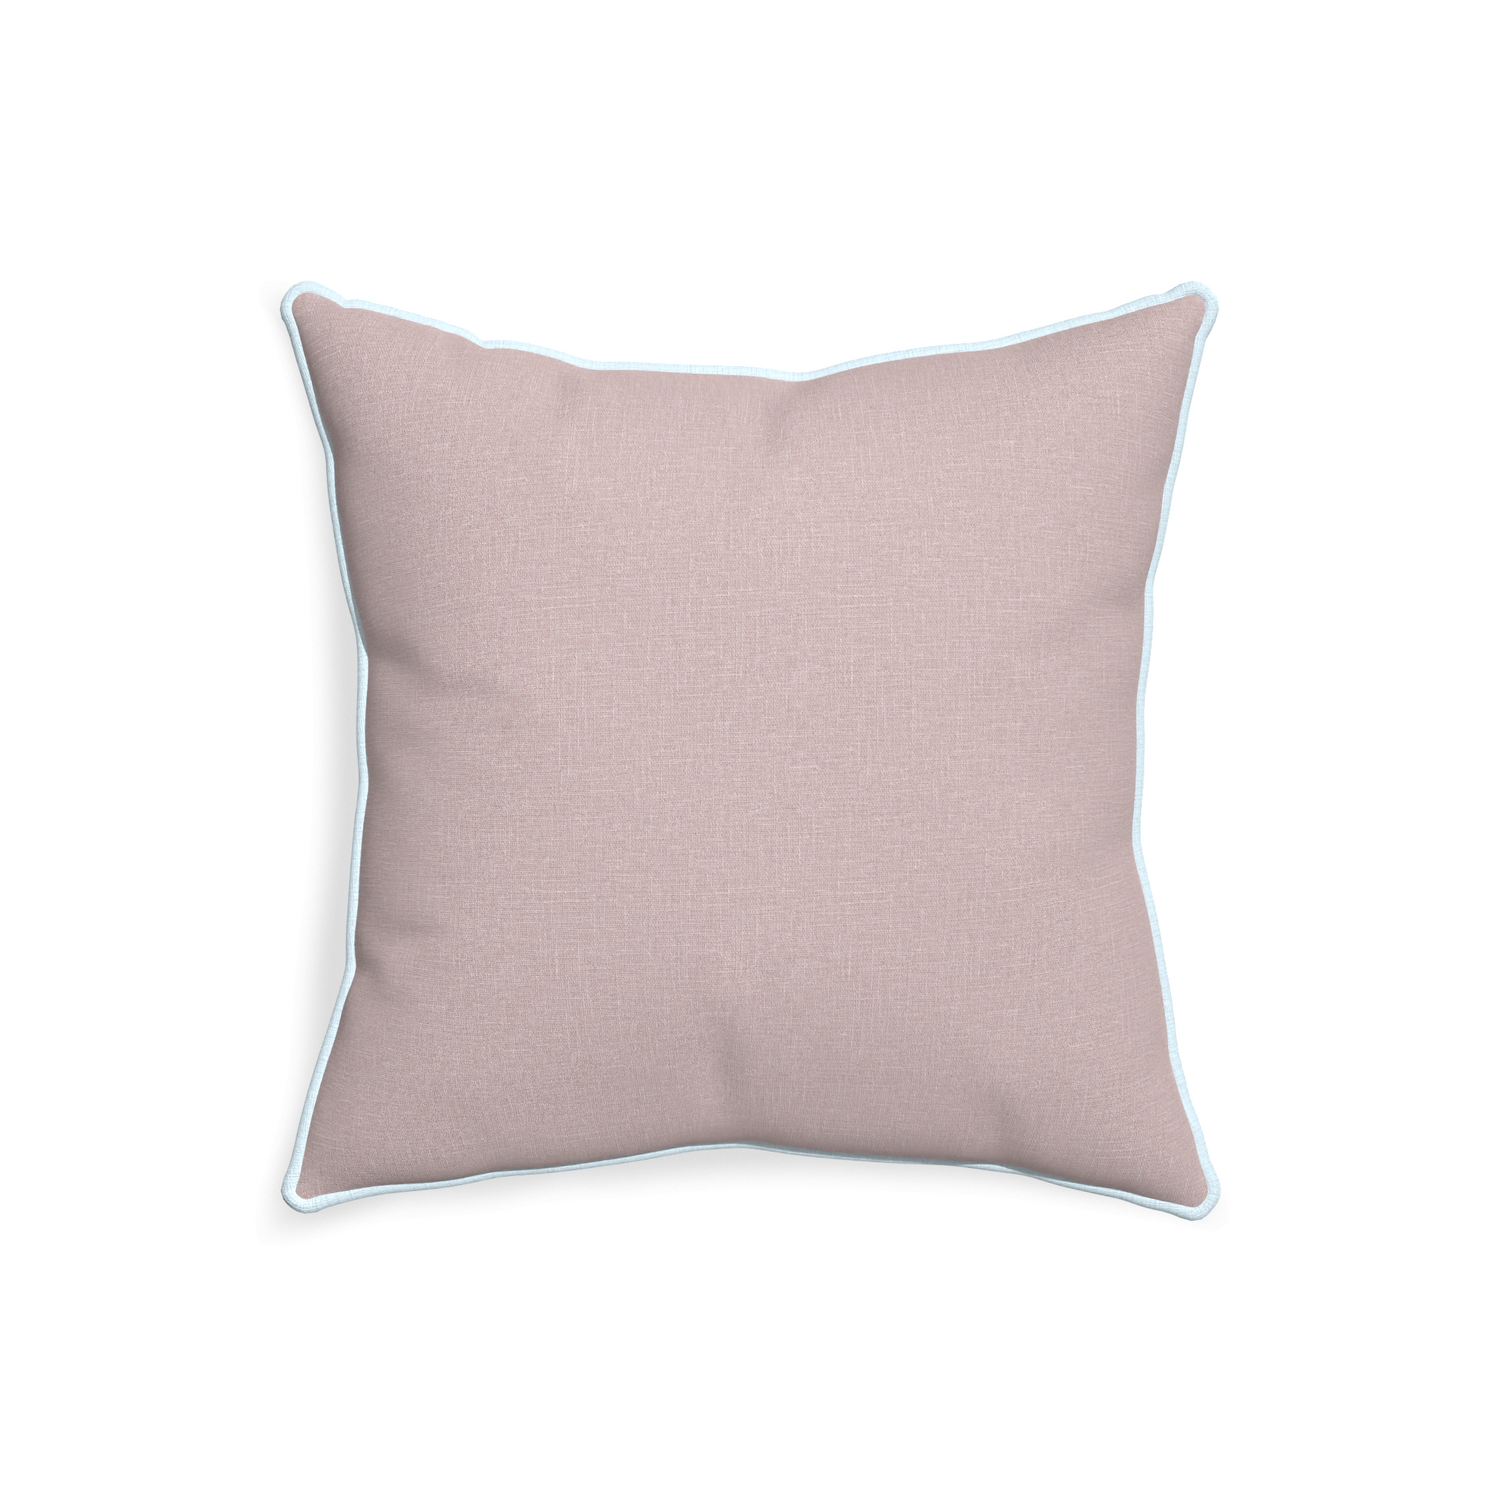 20-square orchid custom mauve pinkpillow with powder piping on white background